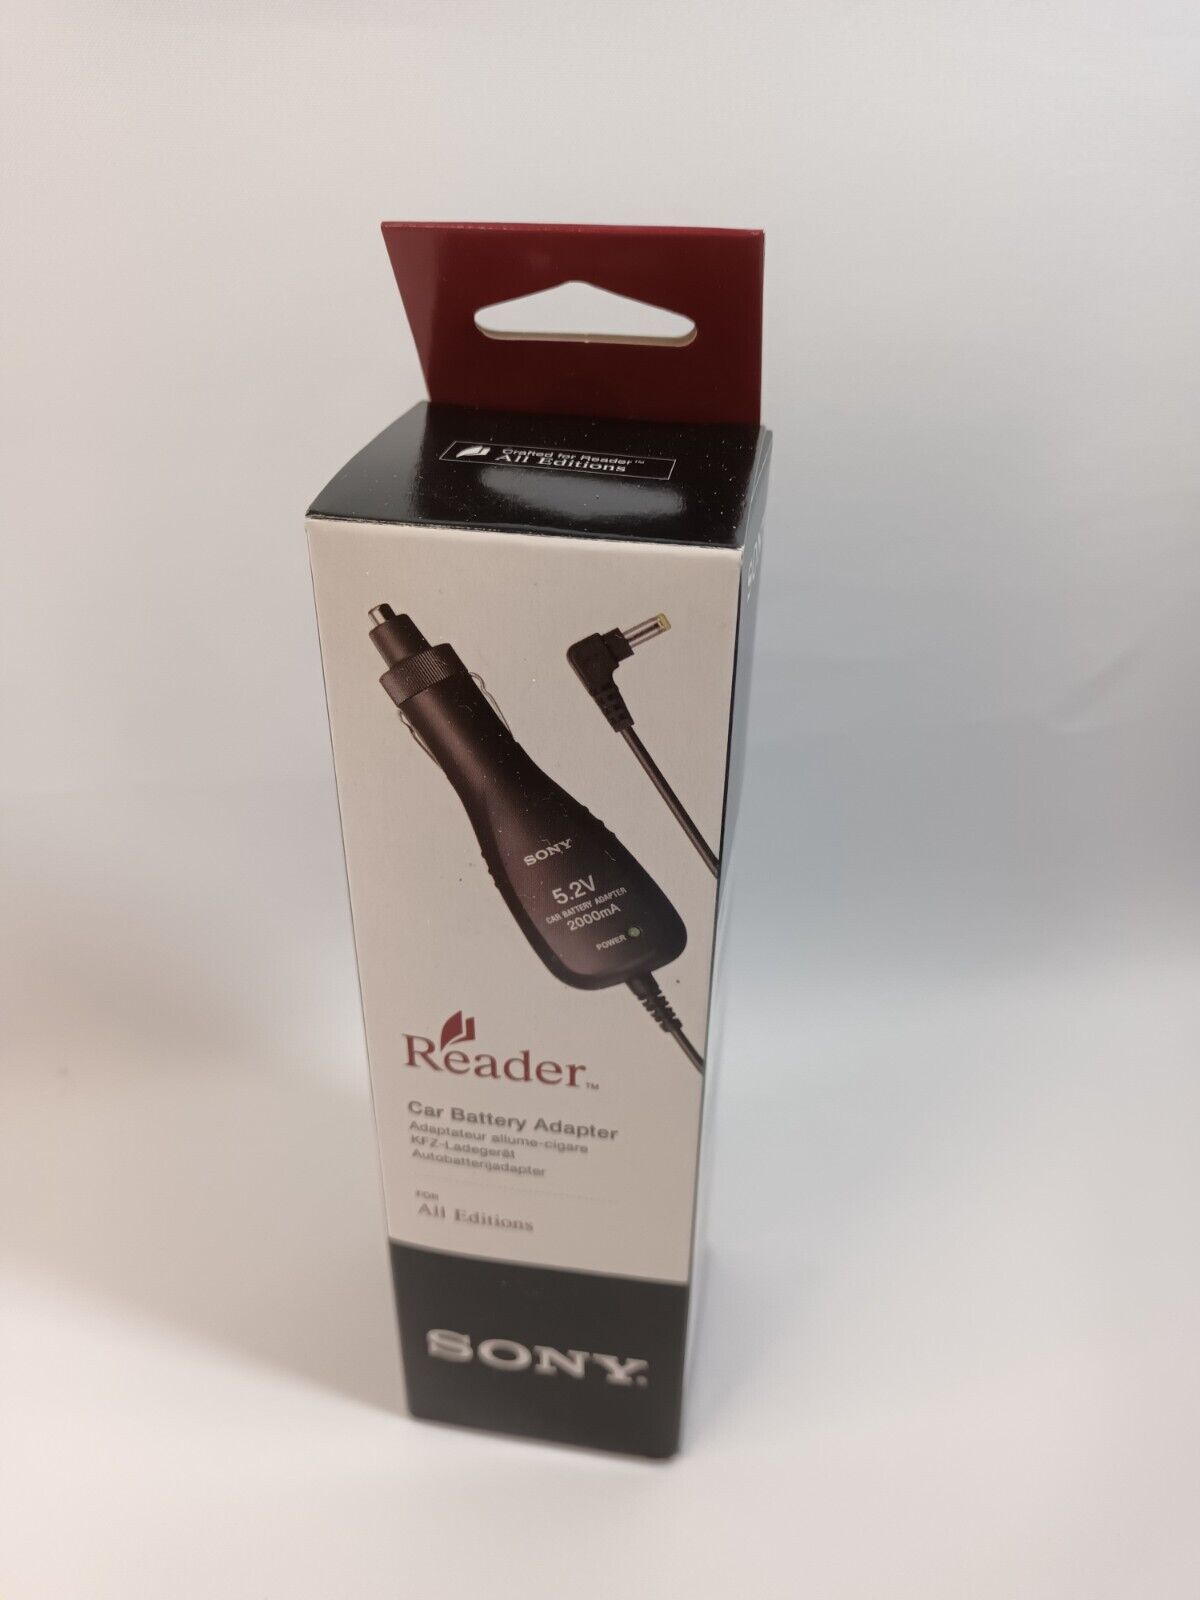 New Sealed Sony Car Battery Adapter Reader All Editions PRSA-CC1 Vintage 2009